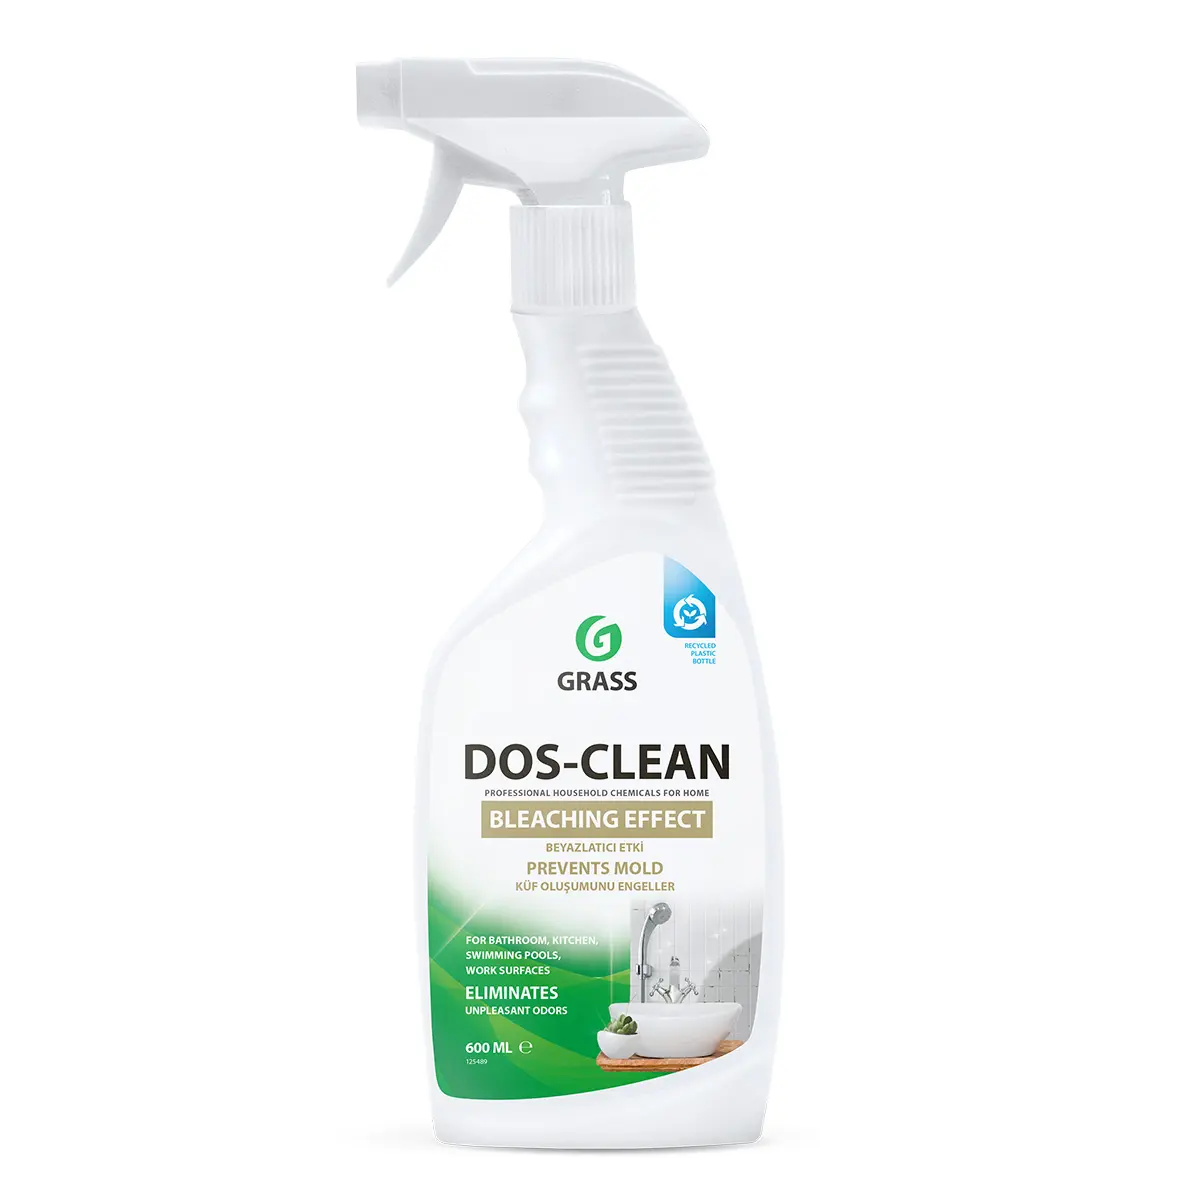 Universal cleaning agent Dos-clean